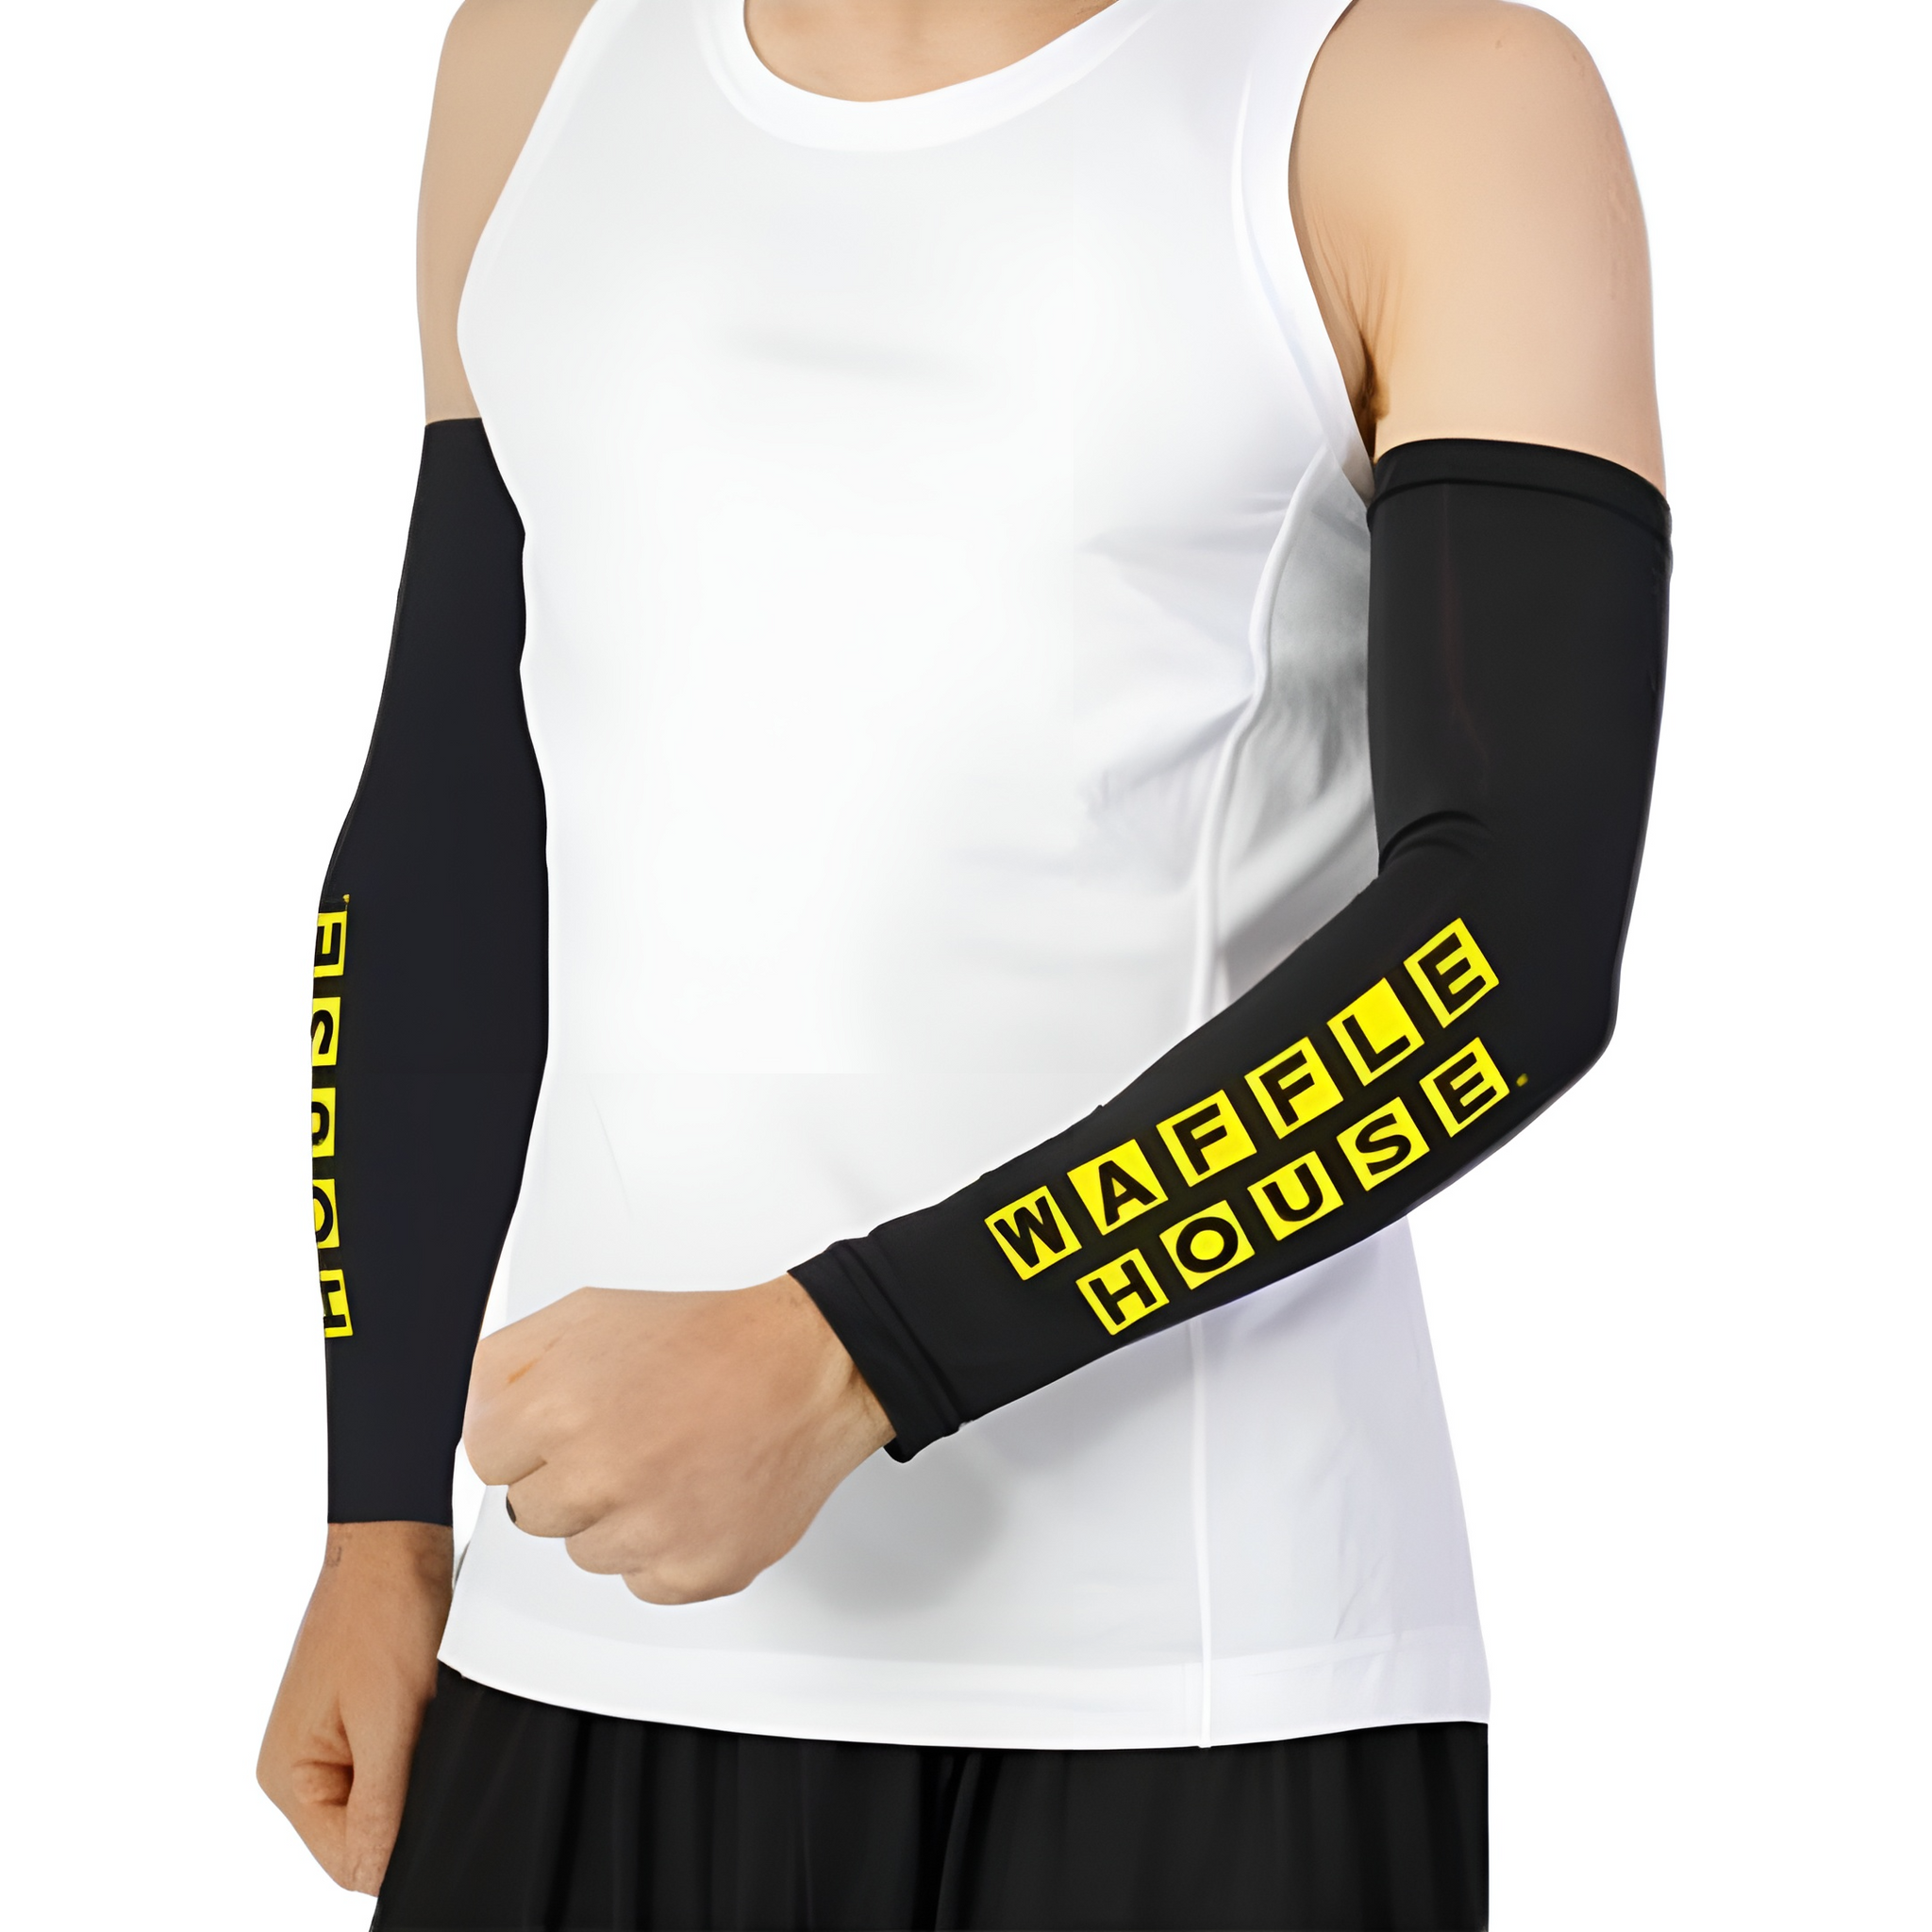 Male model in a white tank top with black sports sleeves with the Waffle House logo.